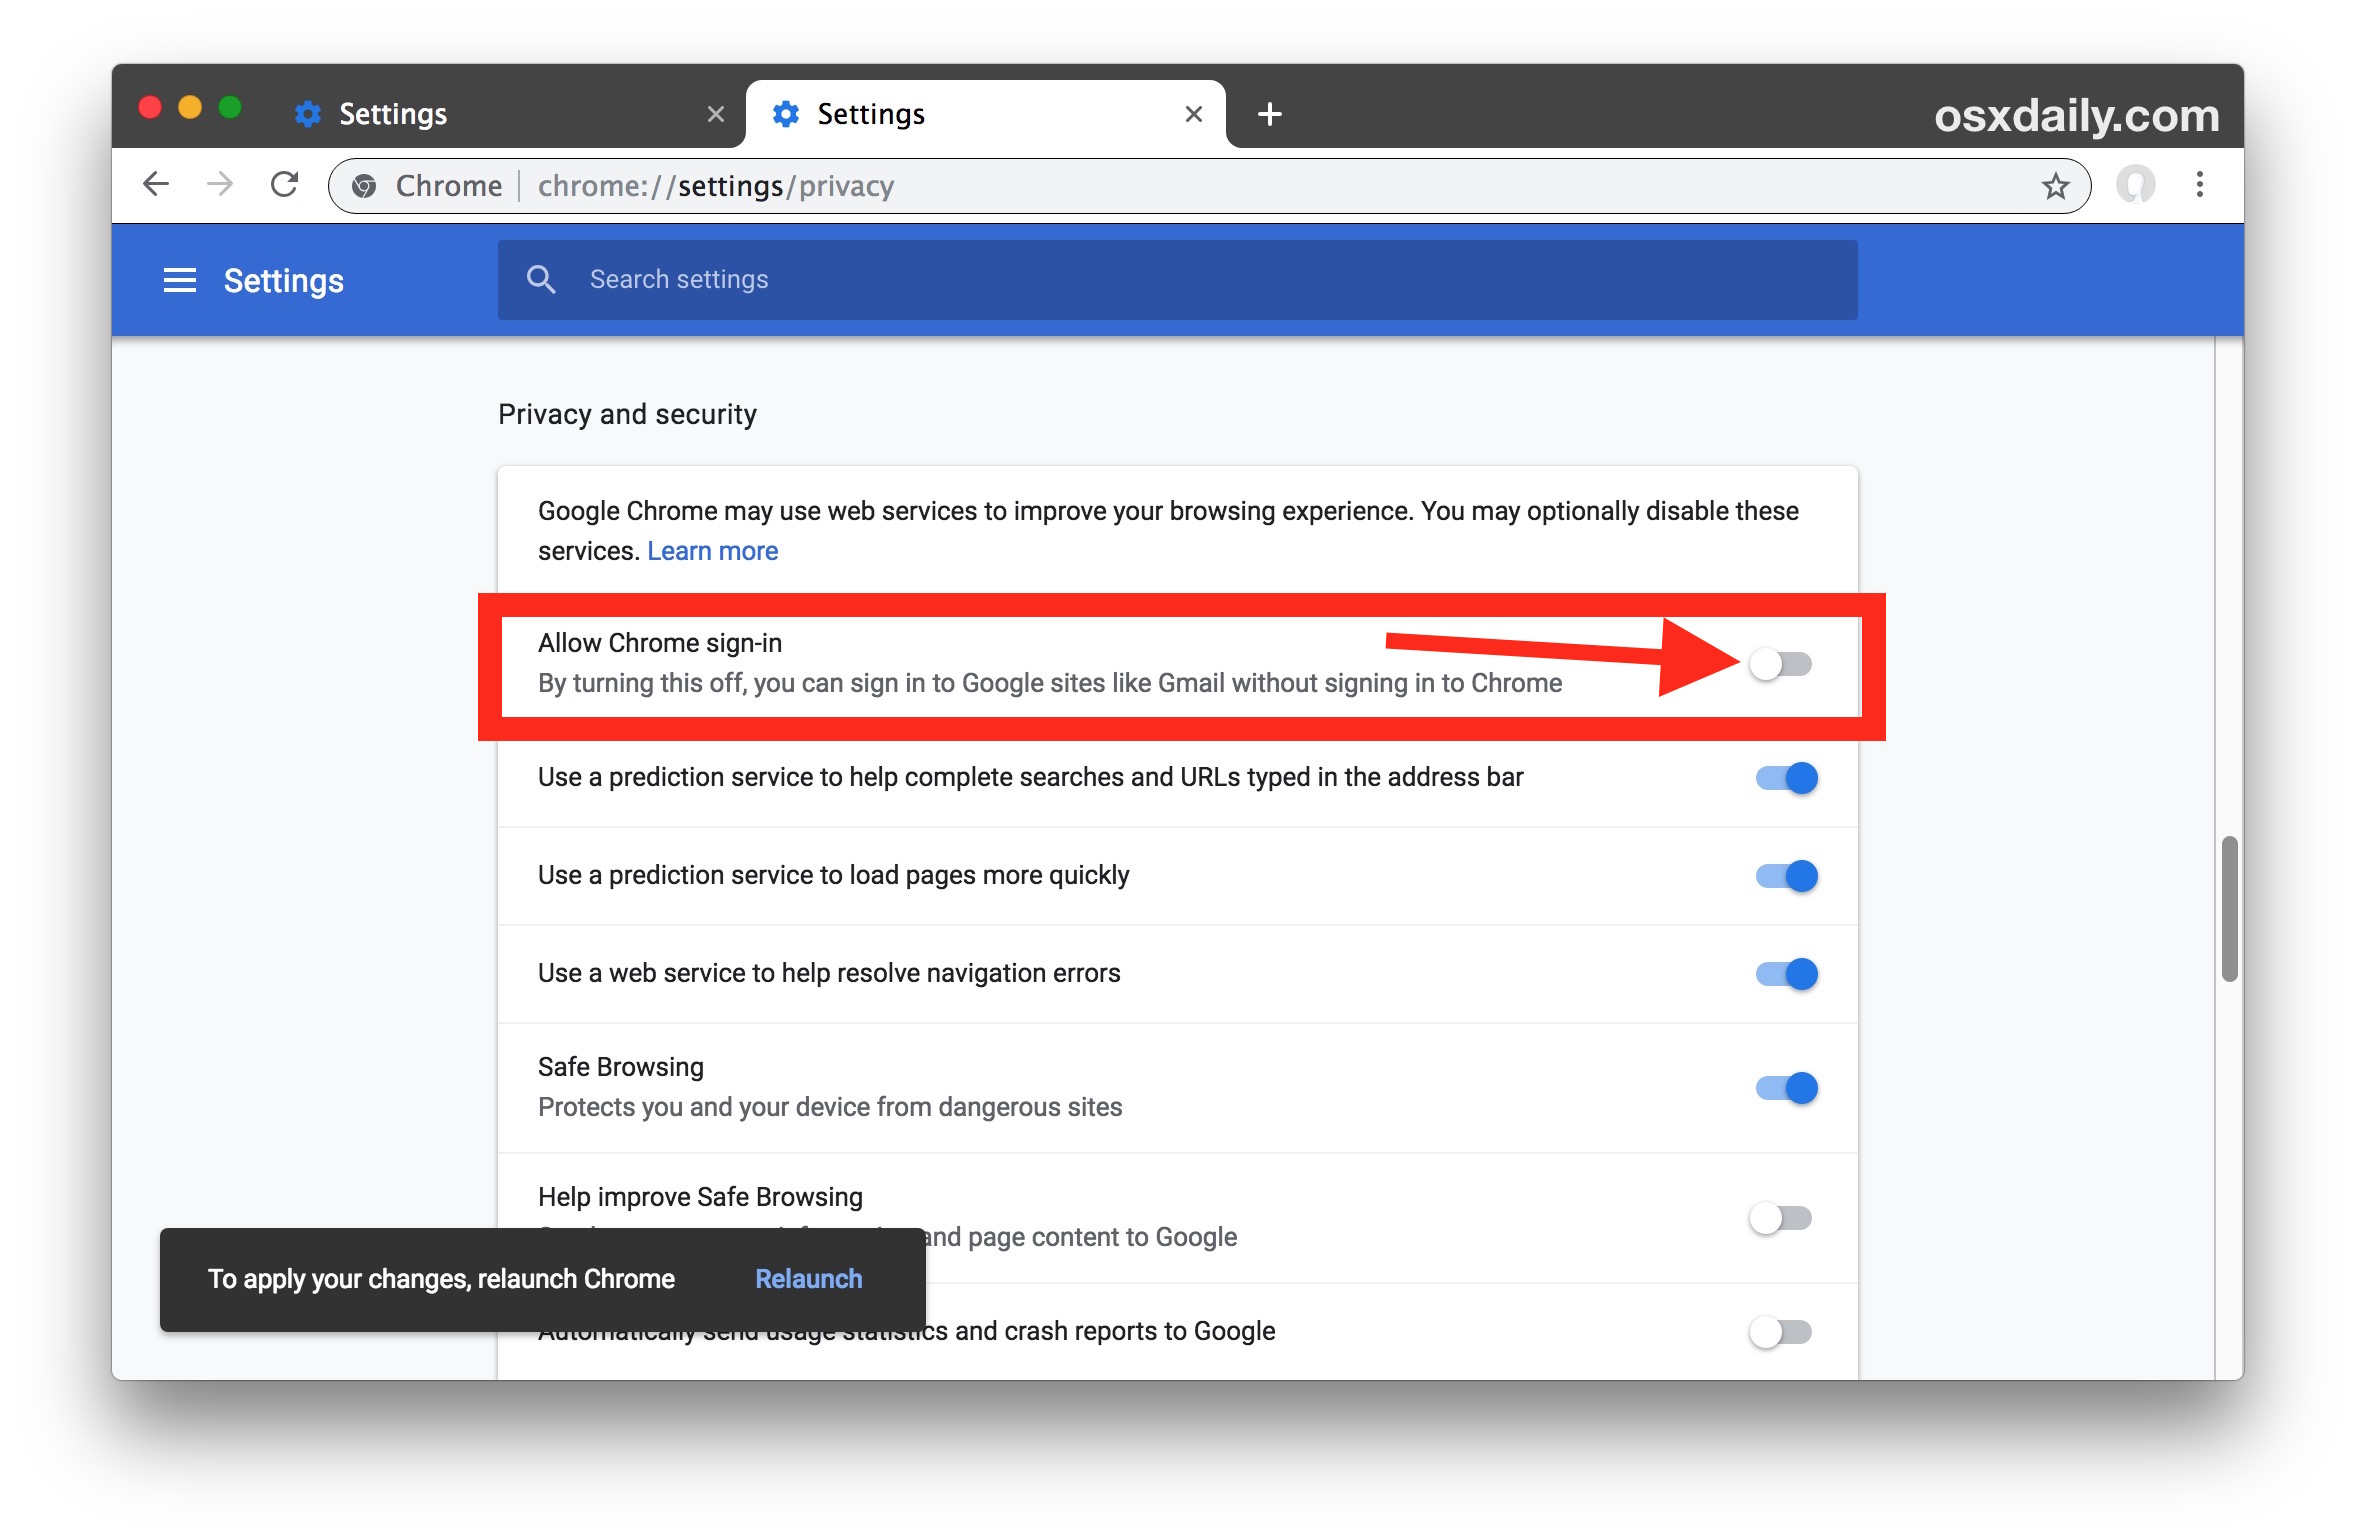 How to disable Chrome sign-in to Google